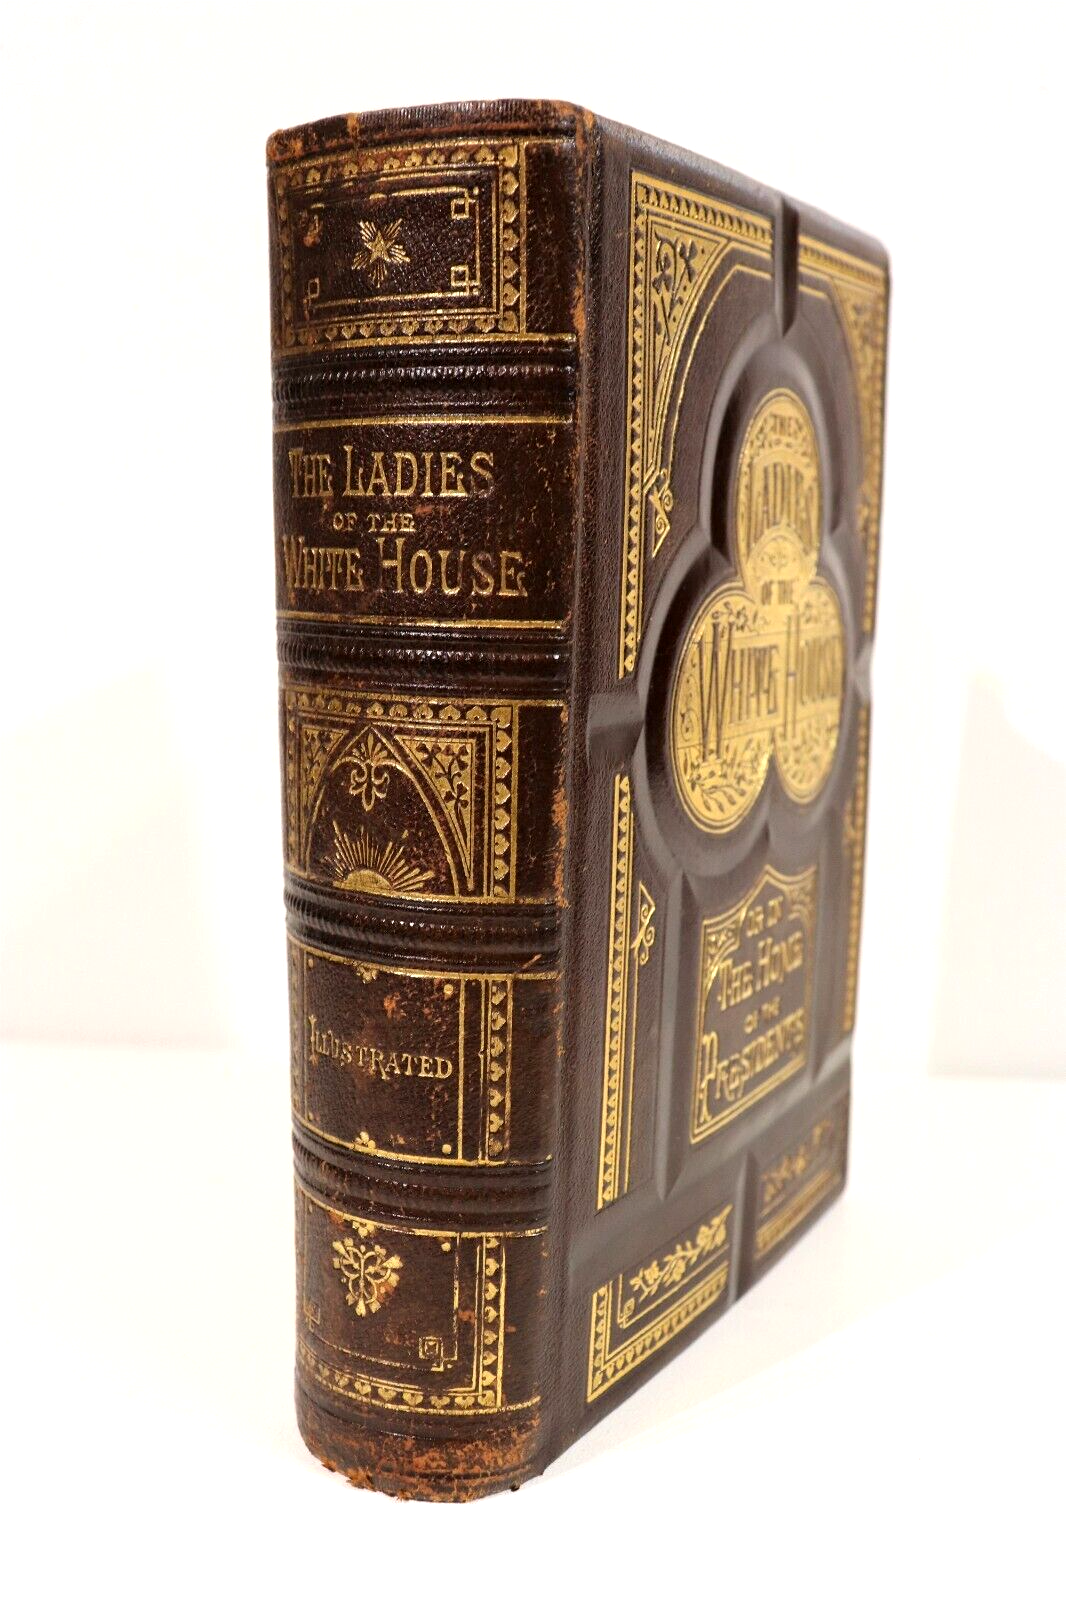 The Ladies Of The White House - 1882 - Antique American History Book